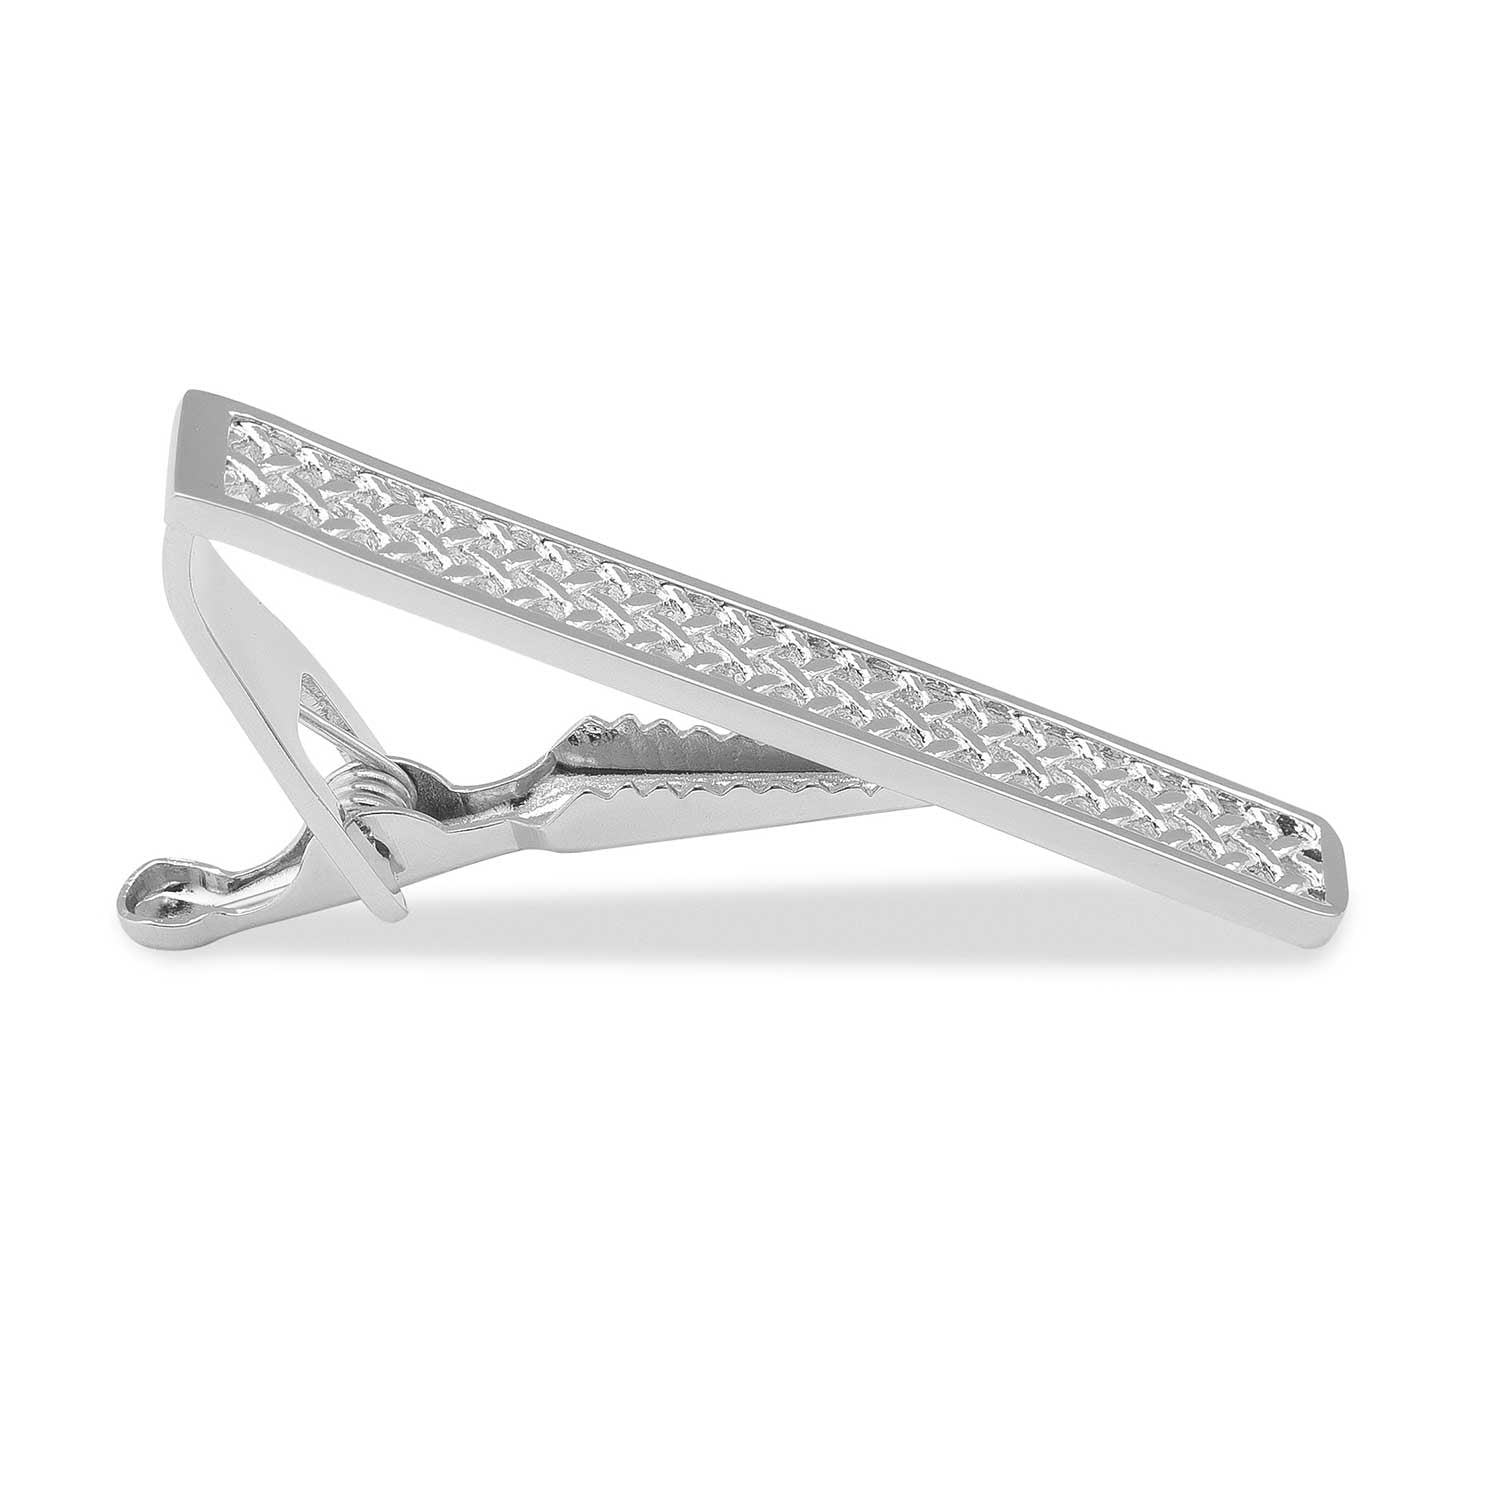 Charlemagne Weave Silver Tie Bars